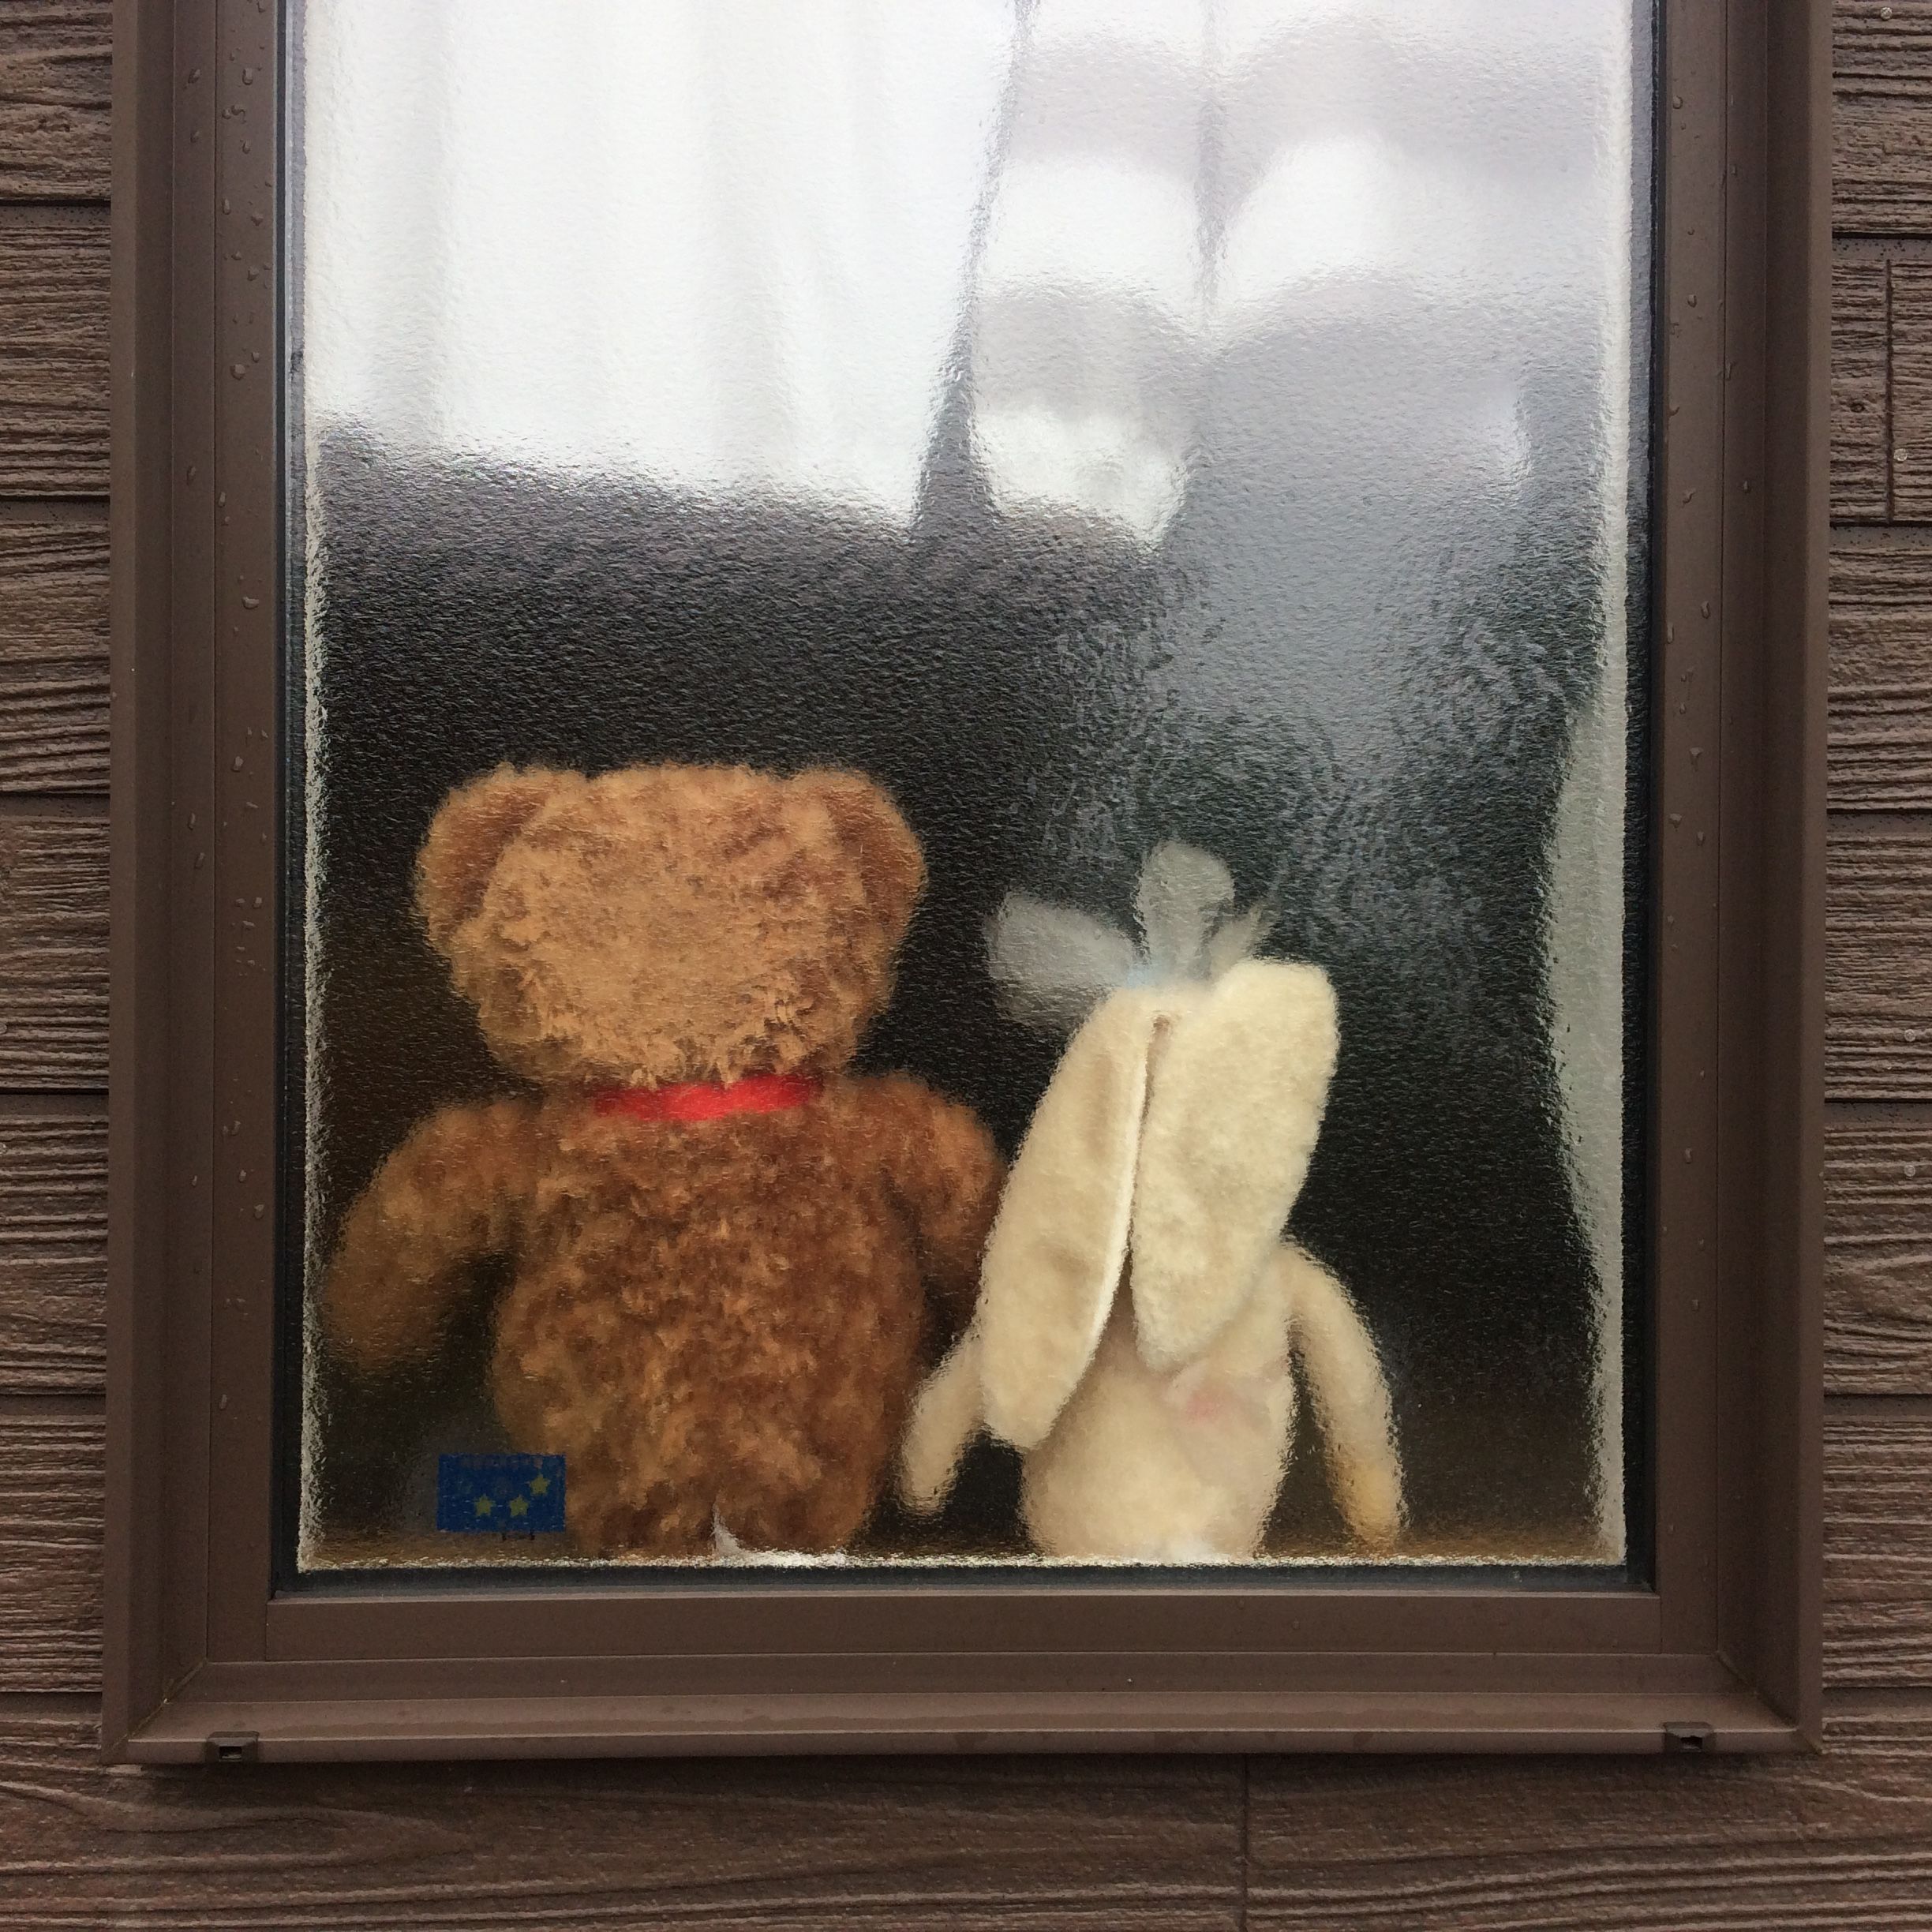 A stuffed bear and a rabbit sit in a window, facing away from the camera.